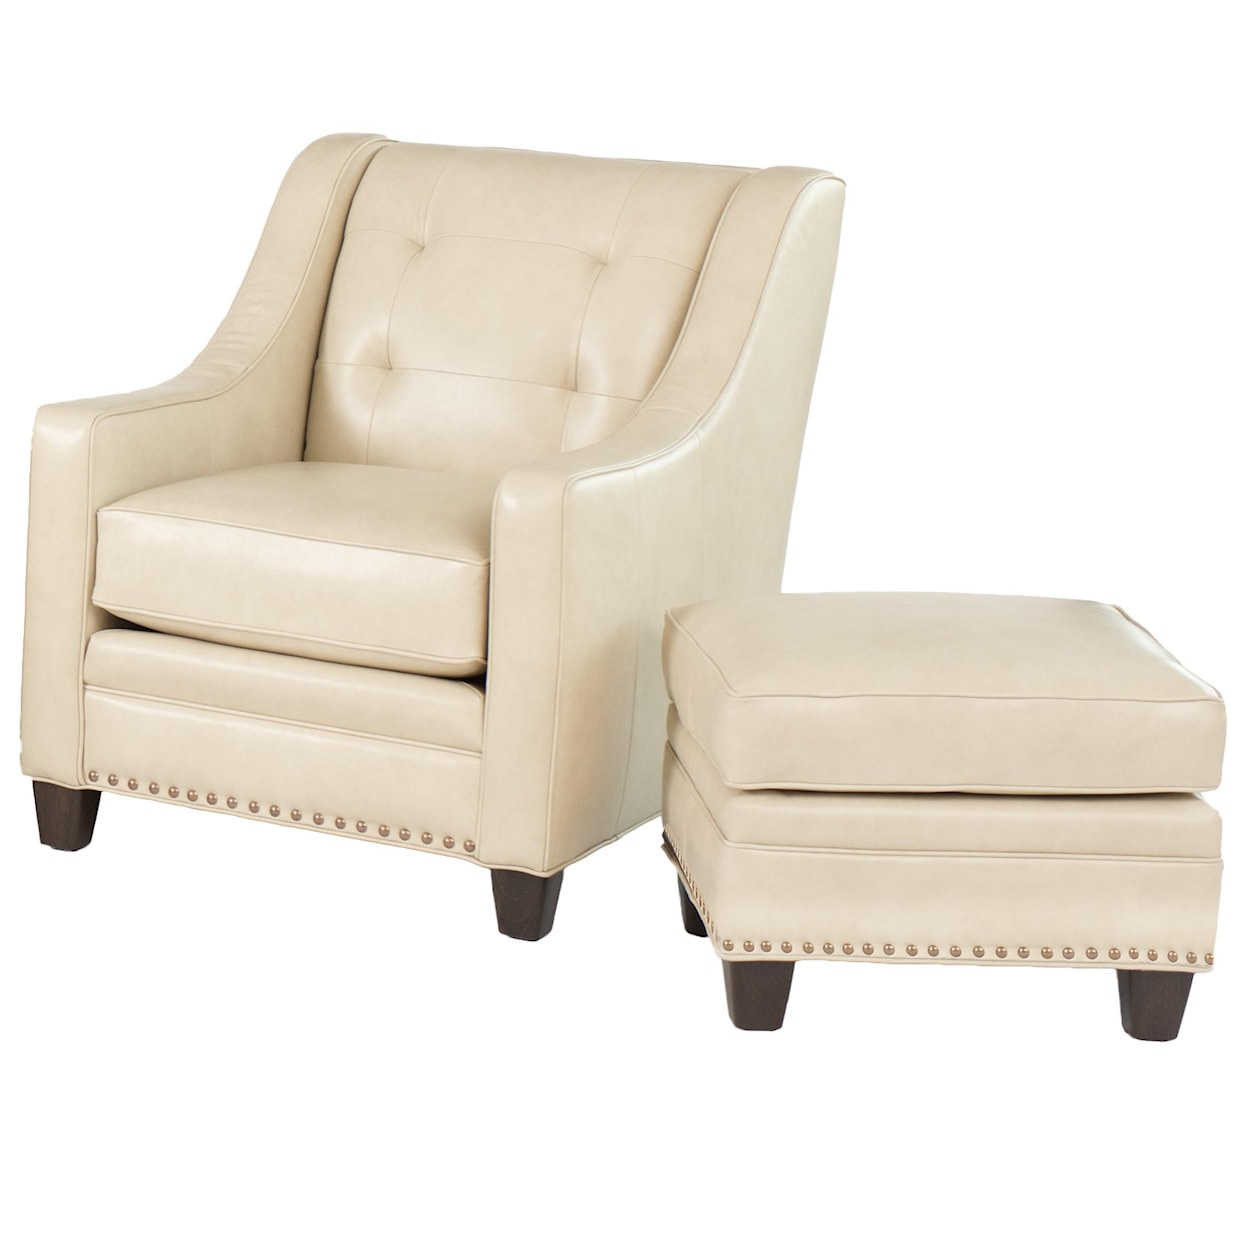 Smith Brothers 203L Transitional Chair with Ottoman